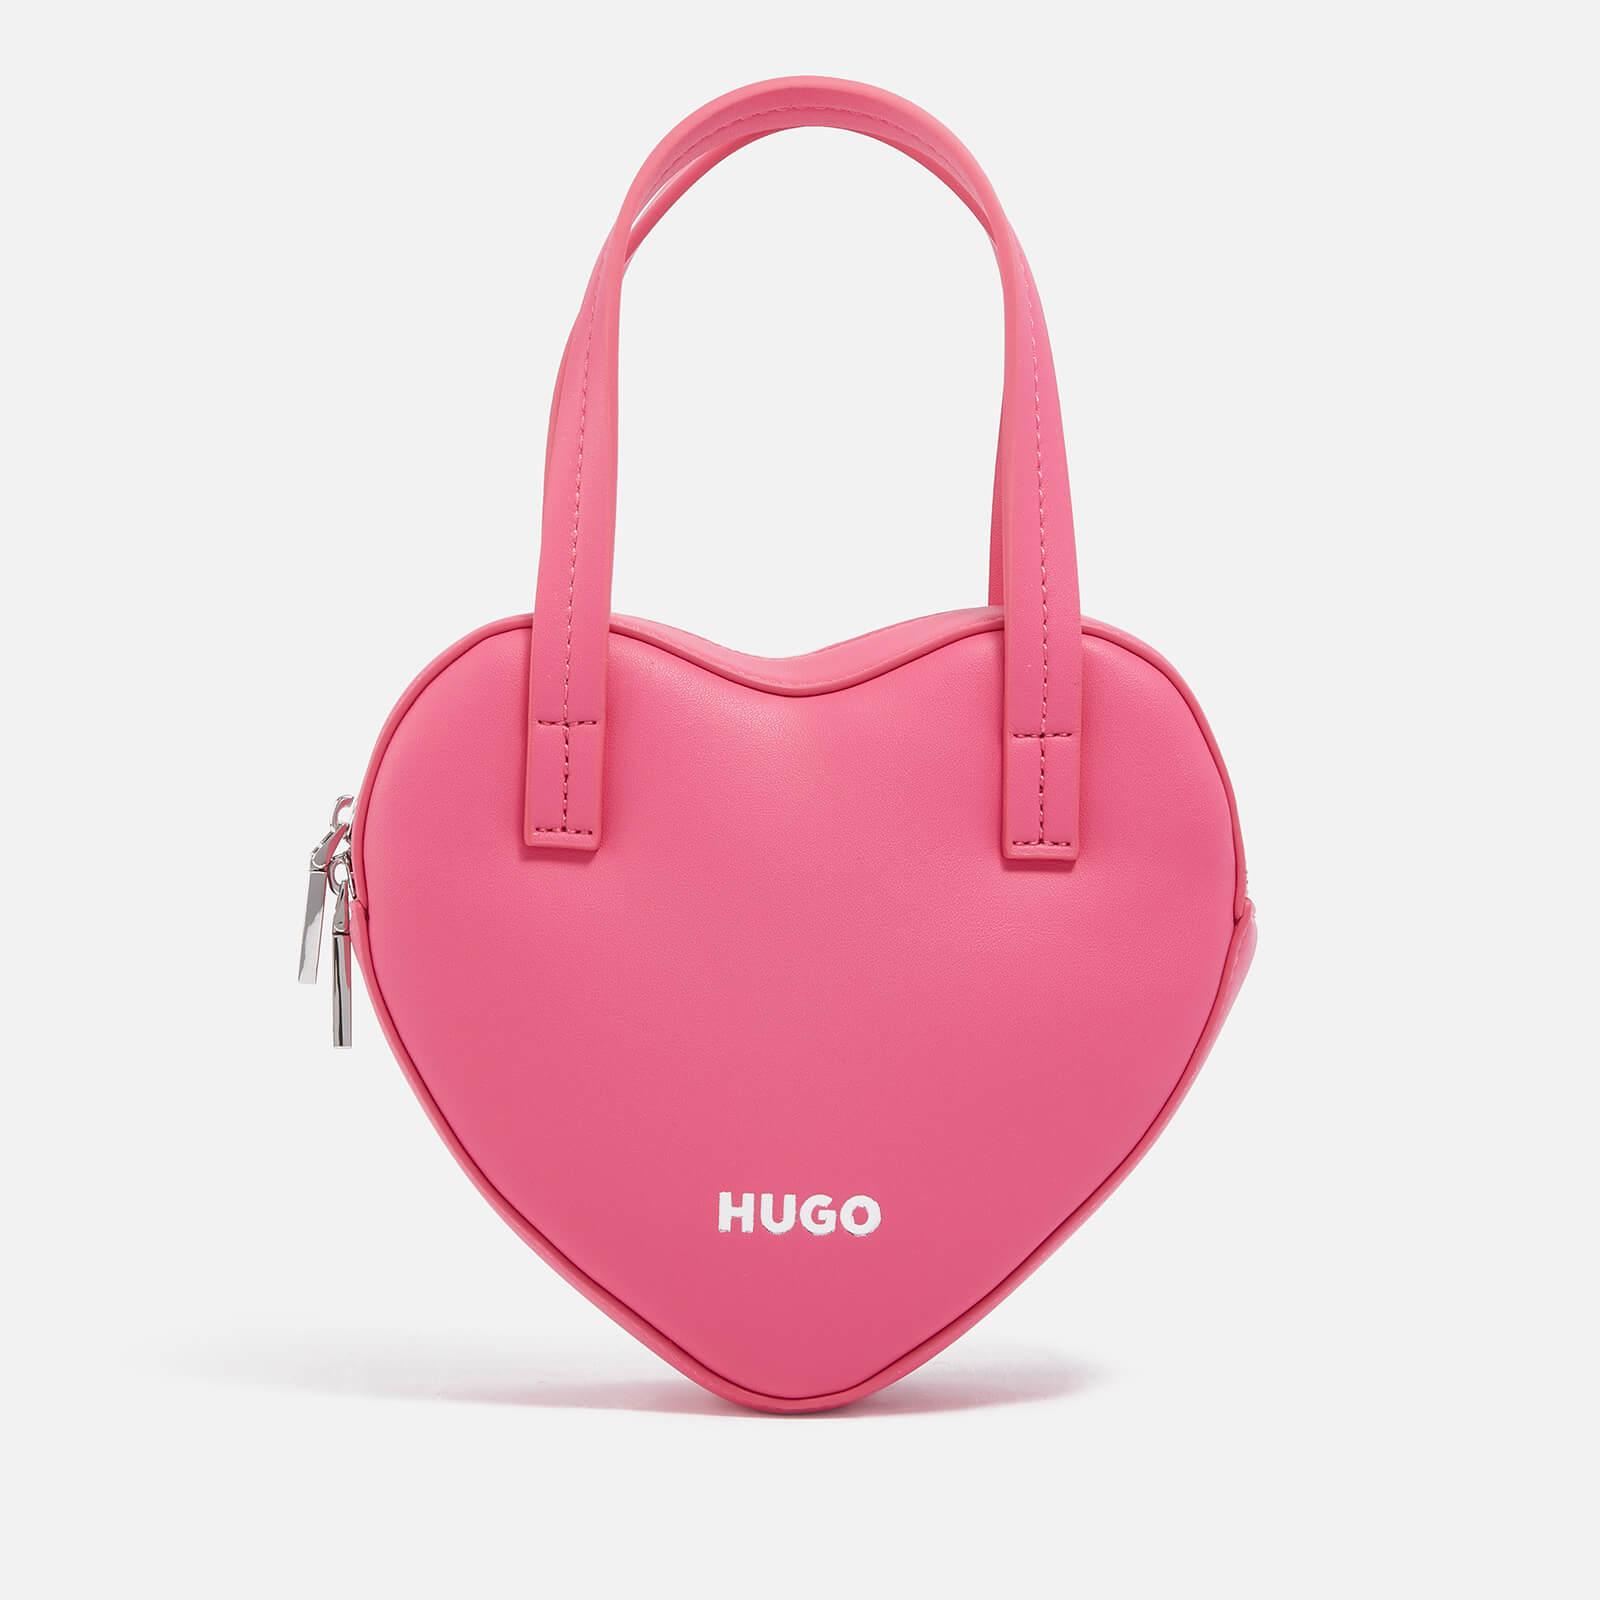 HUGO Love Heart Faux Leather Bag in Pink | Lyst UK